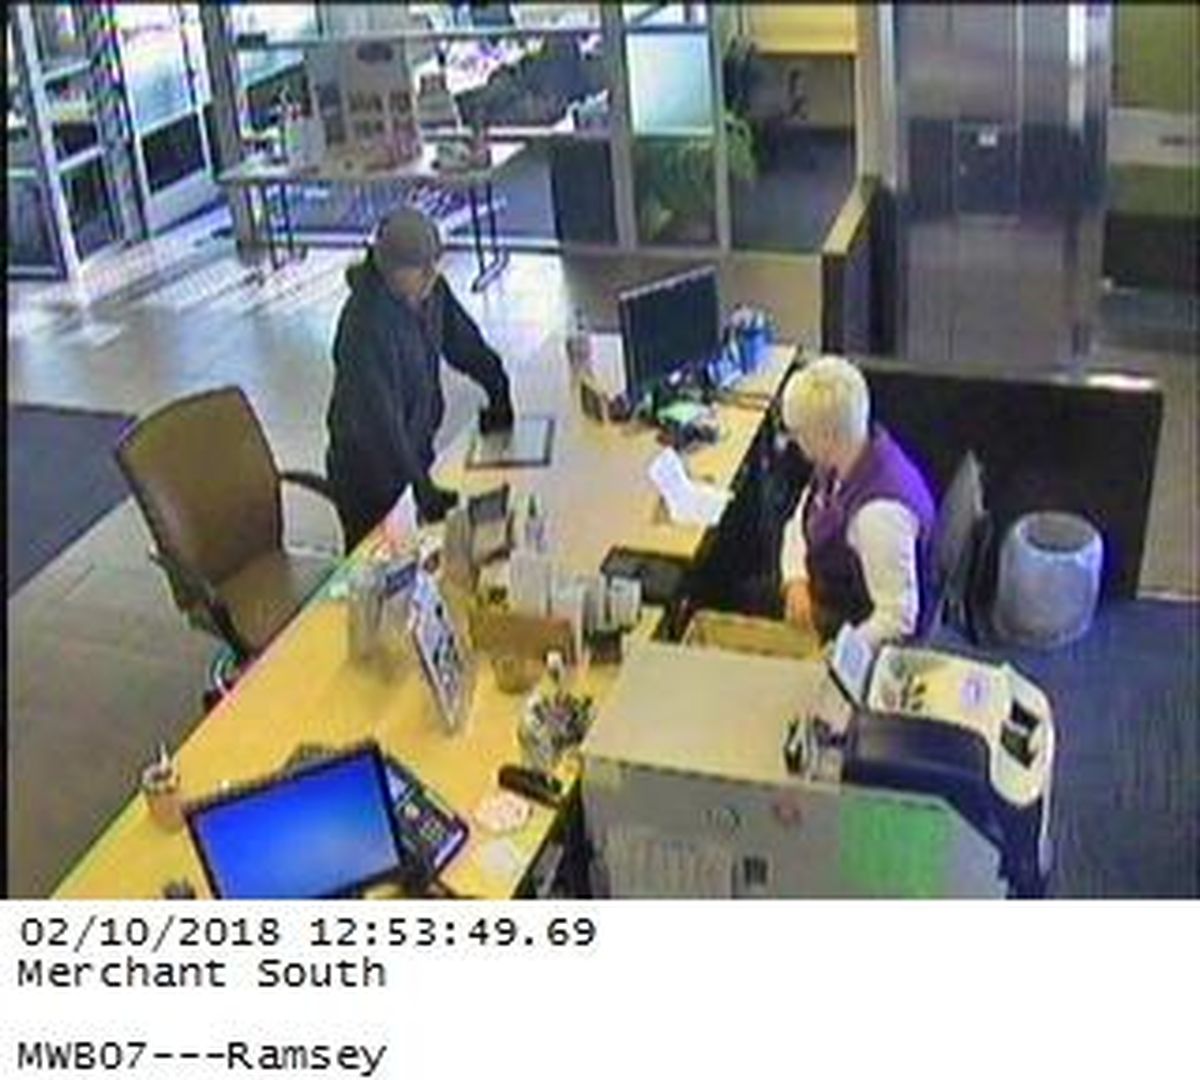 Security footage shows a man suspected of robbing a bank Saturday. (Coeur d’Alene Police Department)